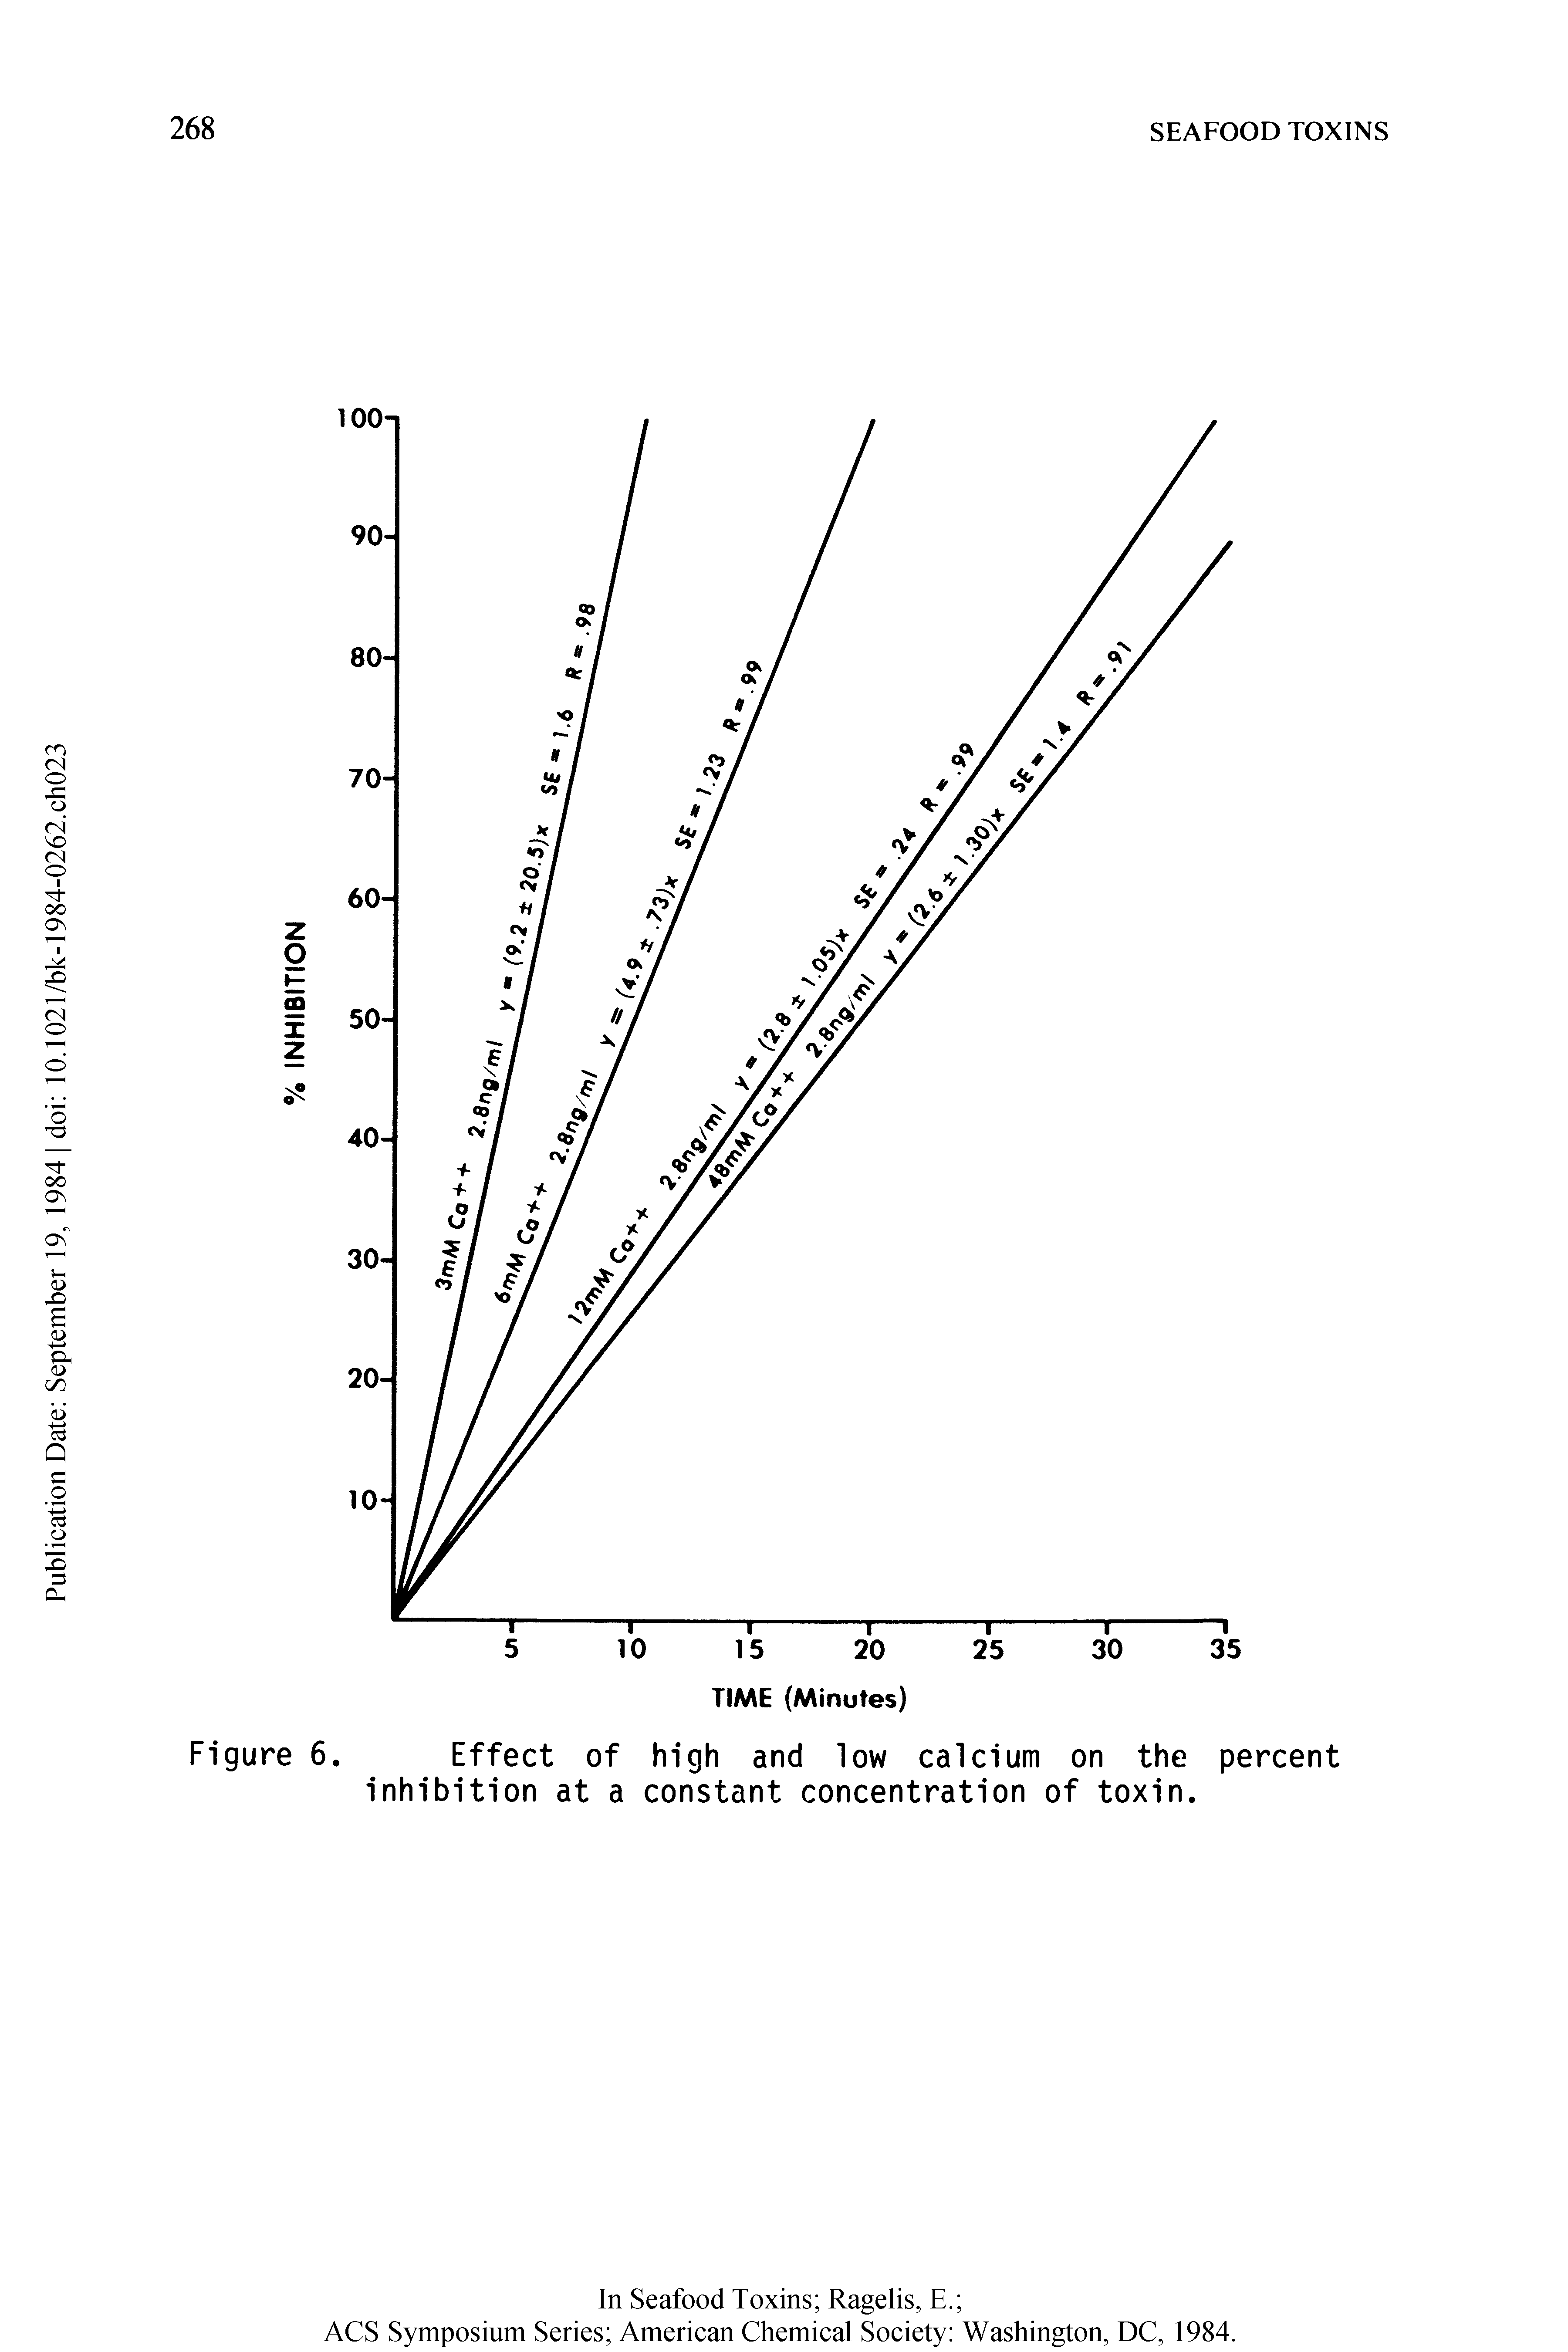 Figure 6. Effect of high and low calcium on the percent inhibition at a constant concentration of toxin.